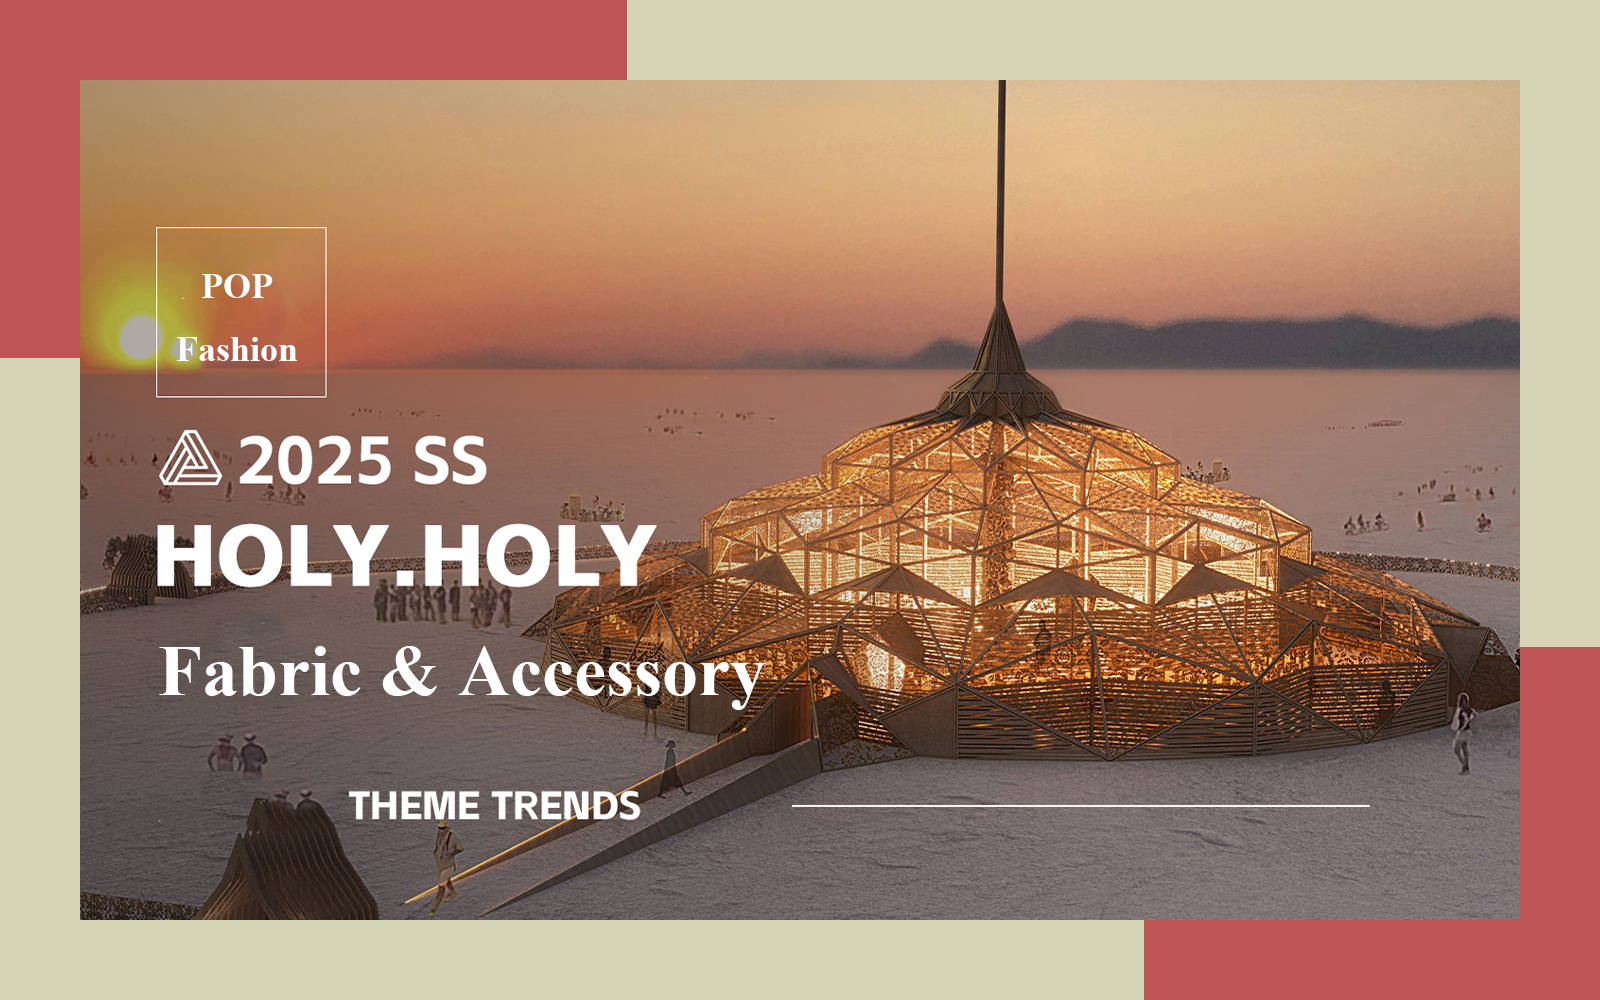 Holy. Holy -- S/S 2025 Fabric & Accessory Trend